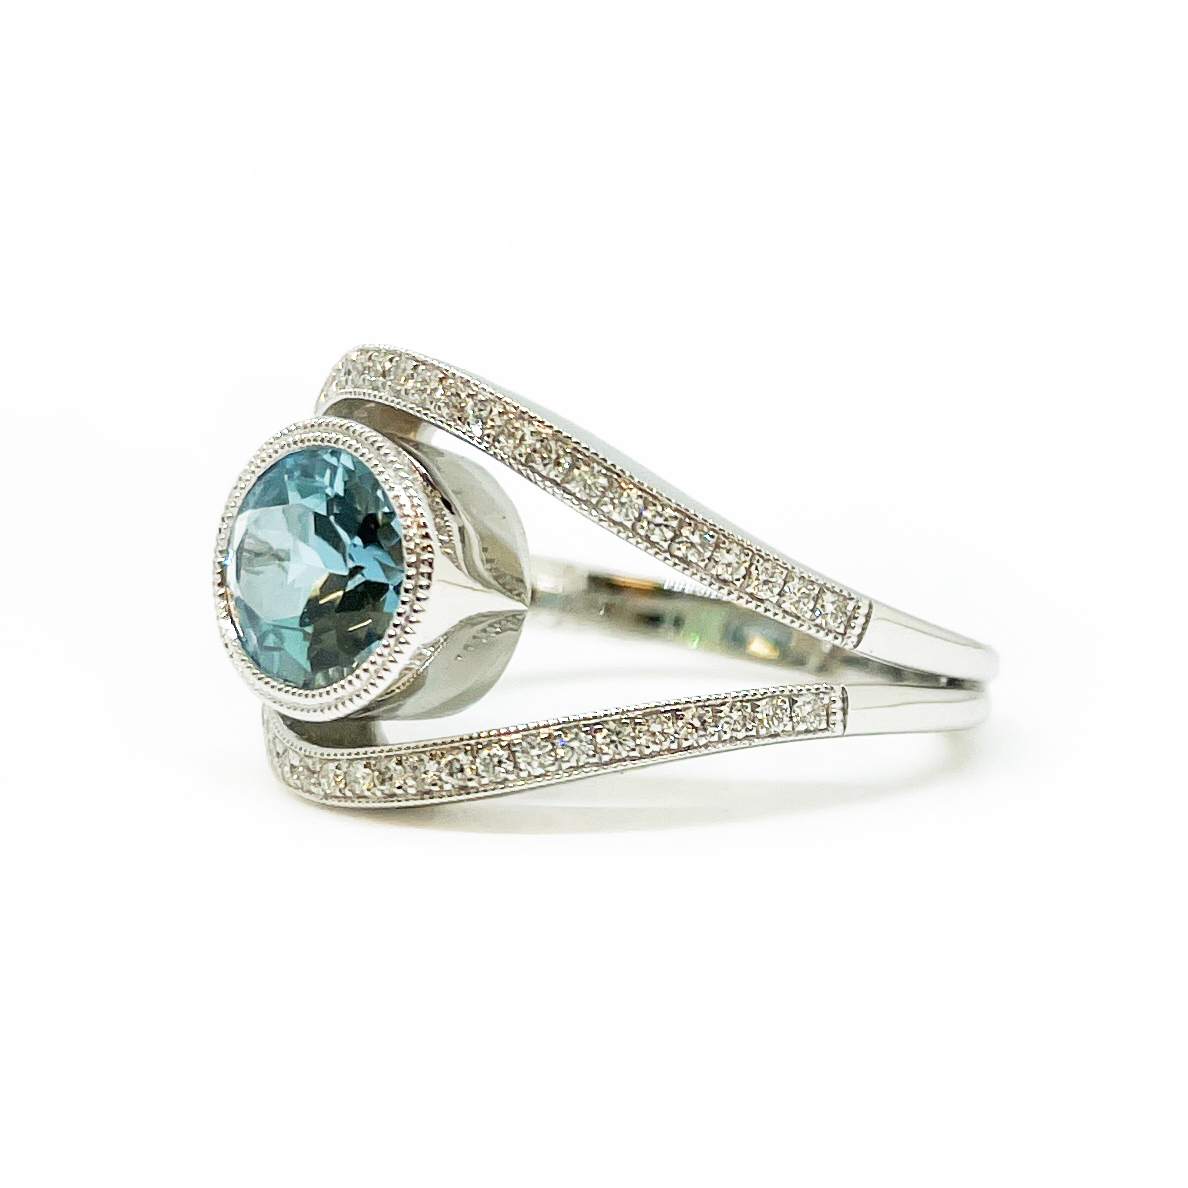 White Gold Ring with Aqua and Diamonds